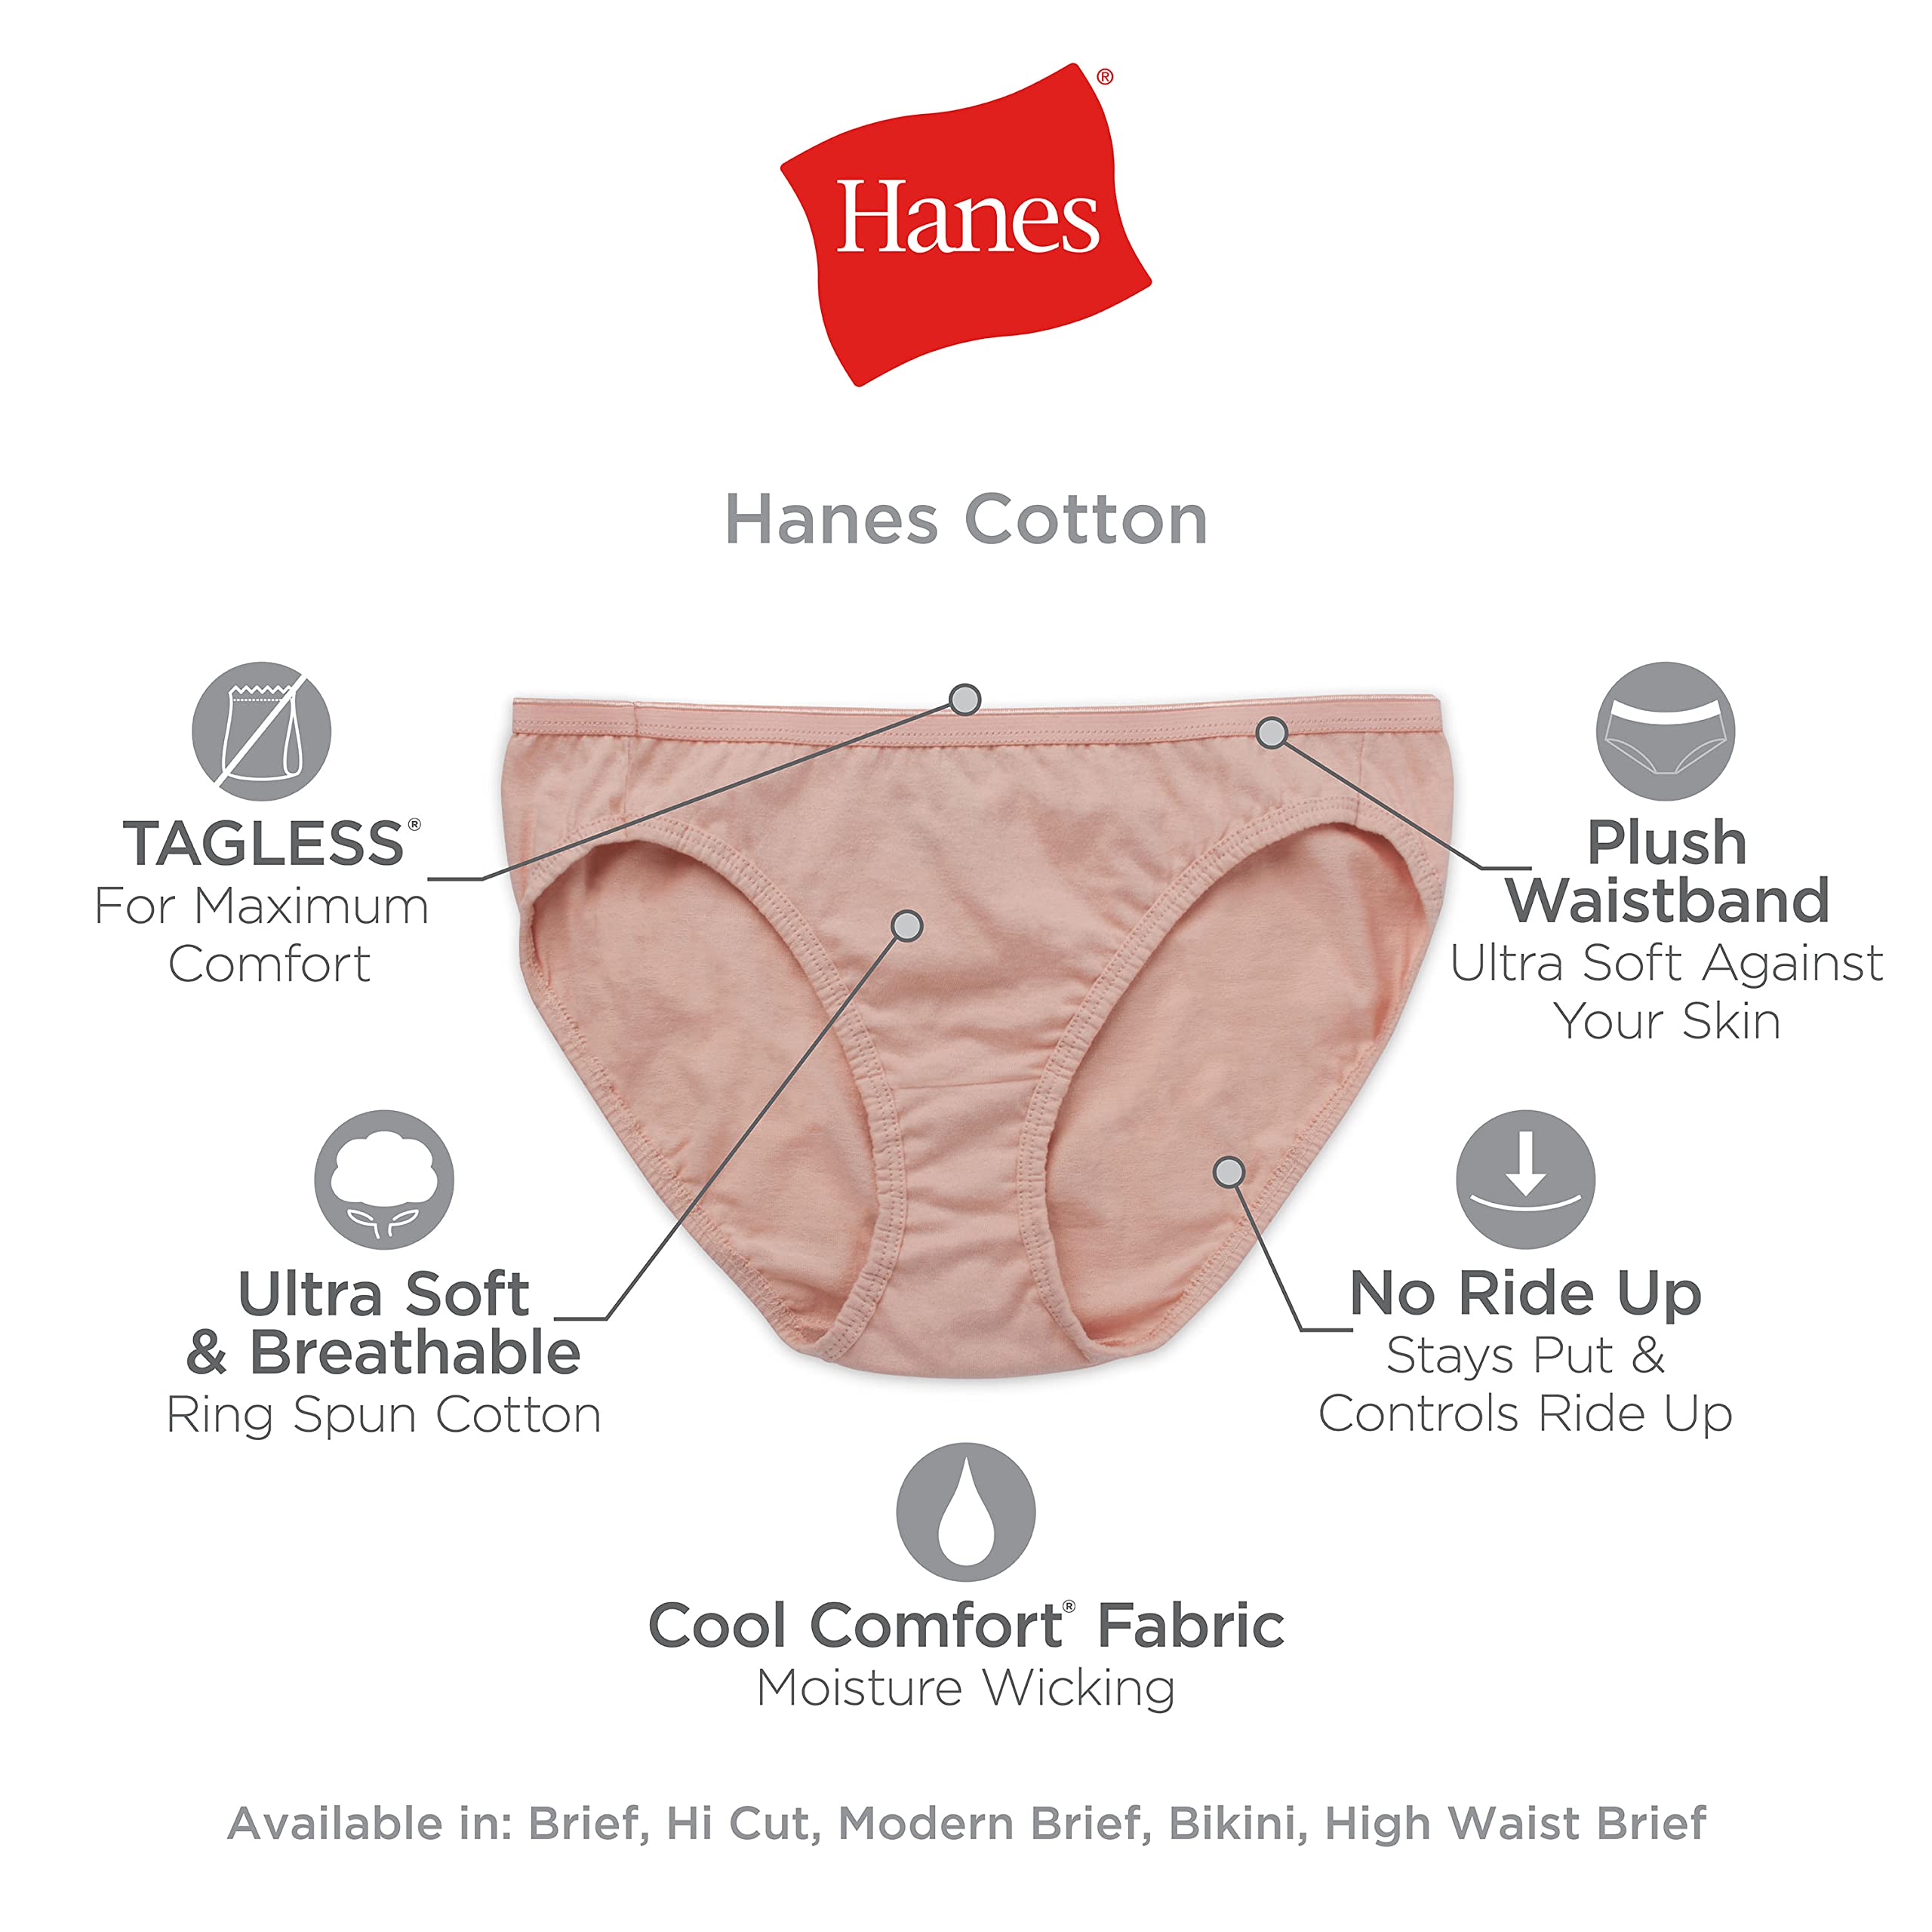 Hanes Women's Panties Pack, Lightweight Cotton Hi-cuts, Moisture-Wicking (Colors May Vary)